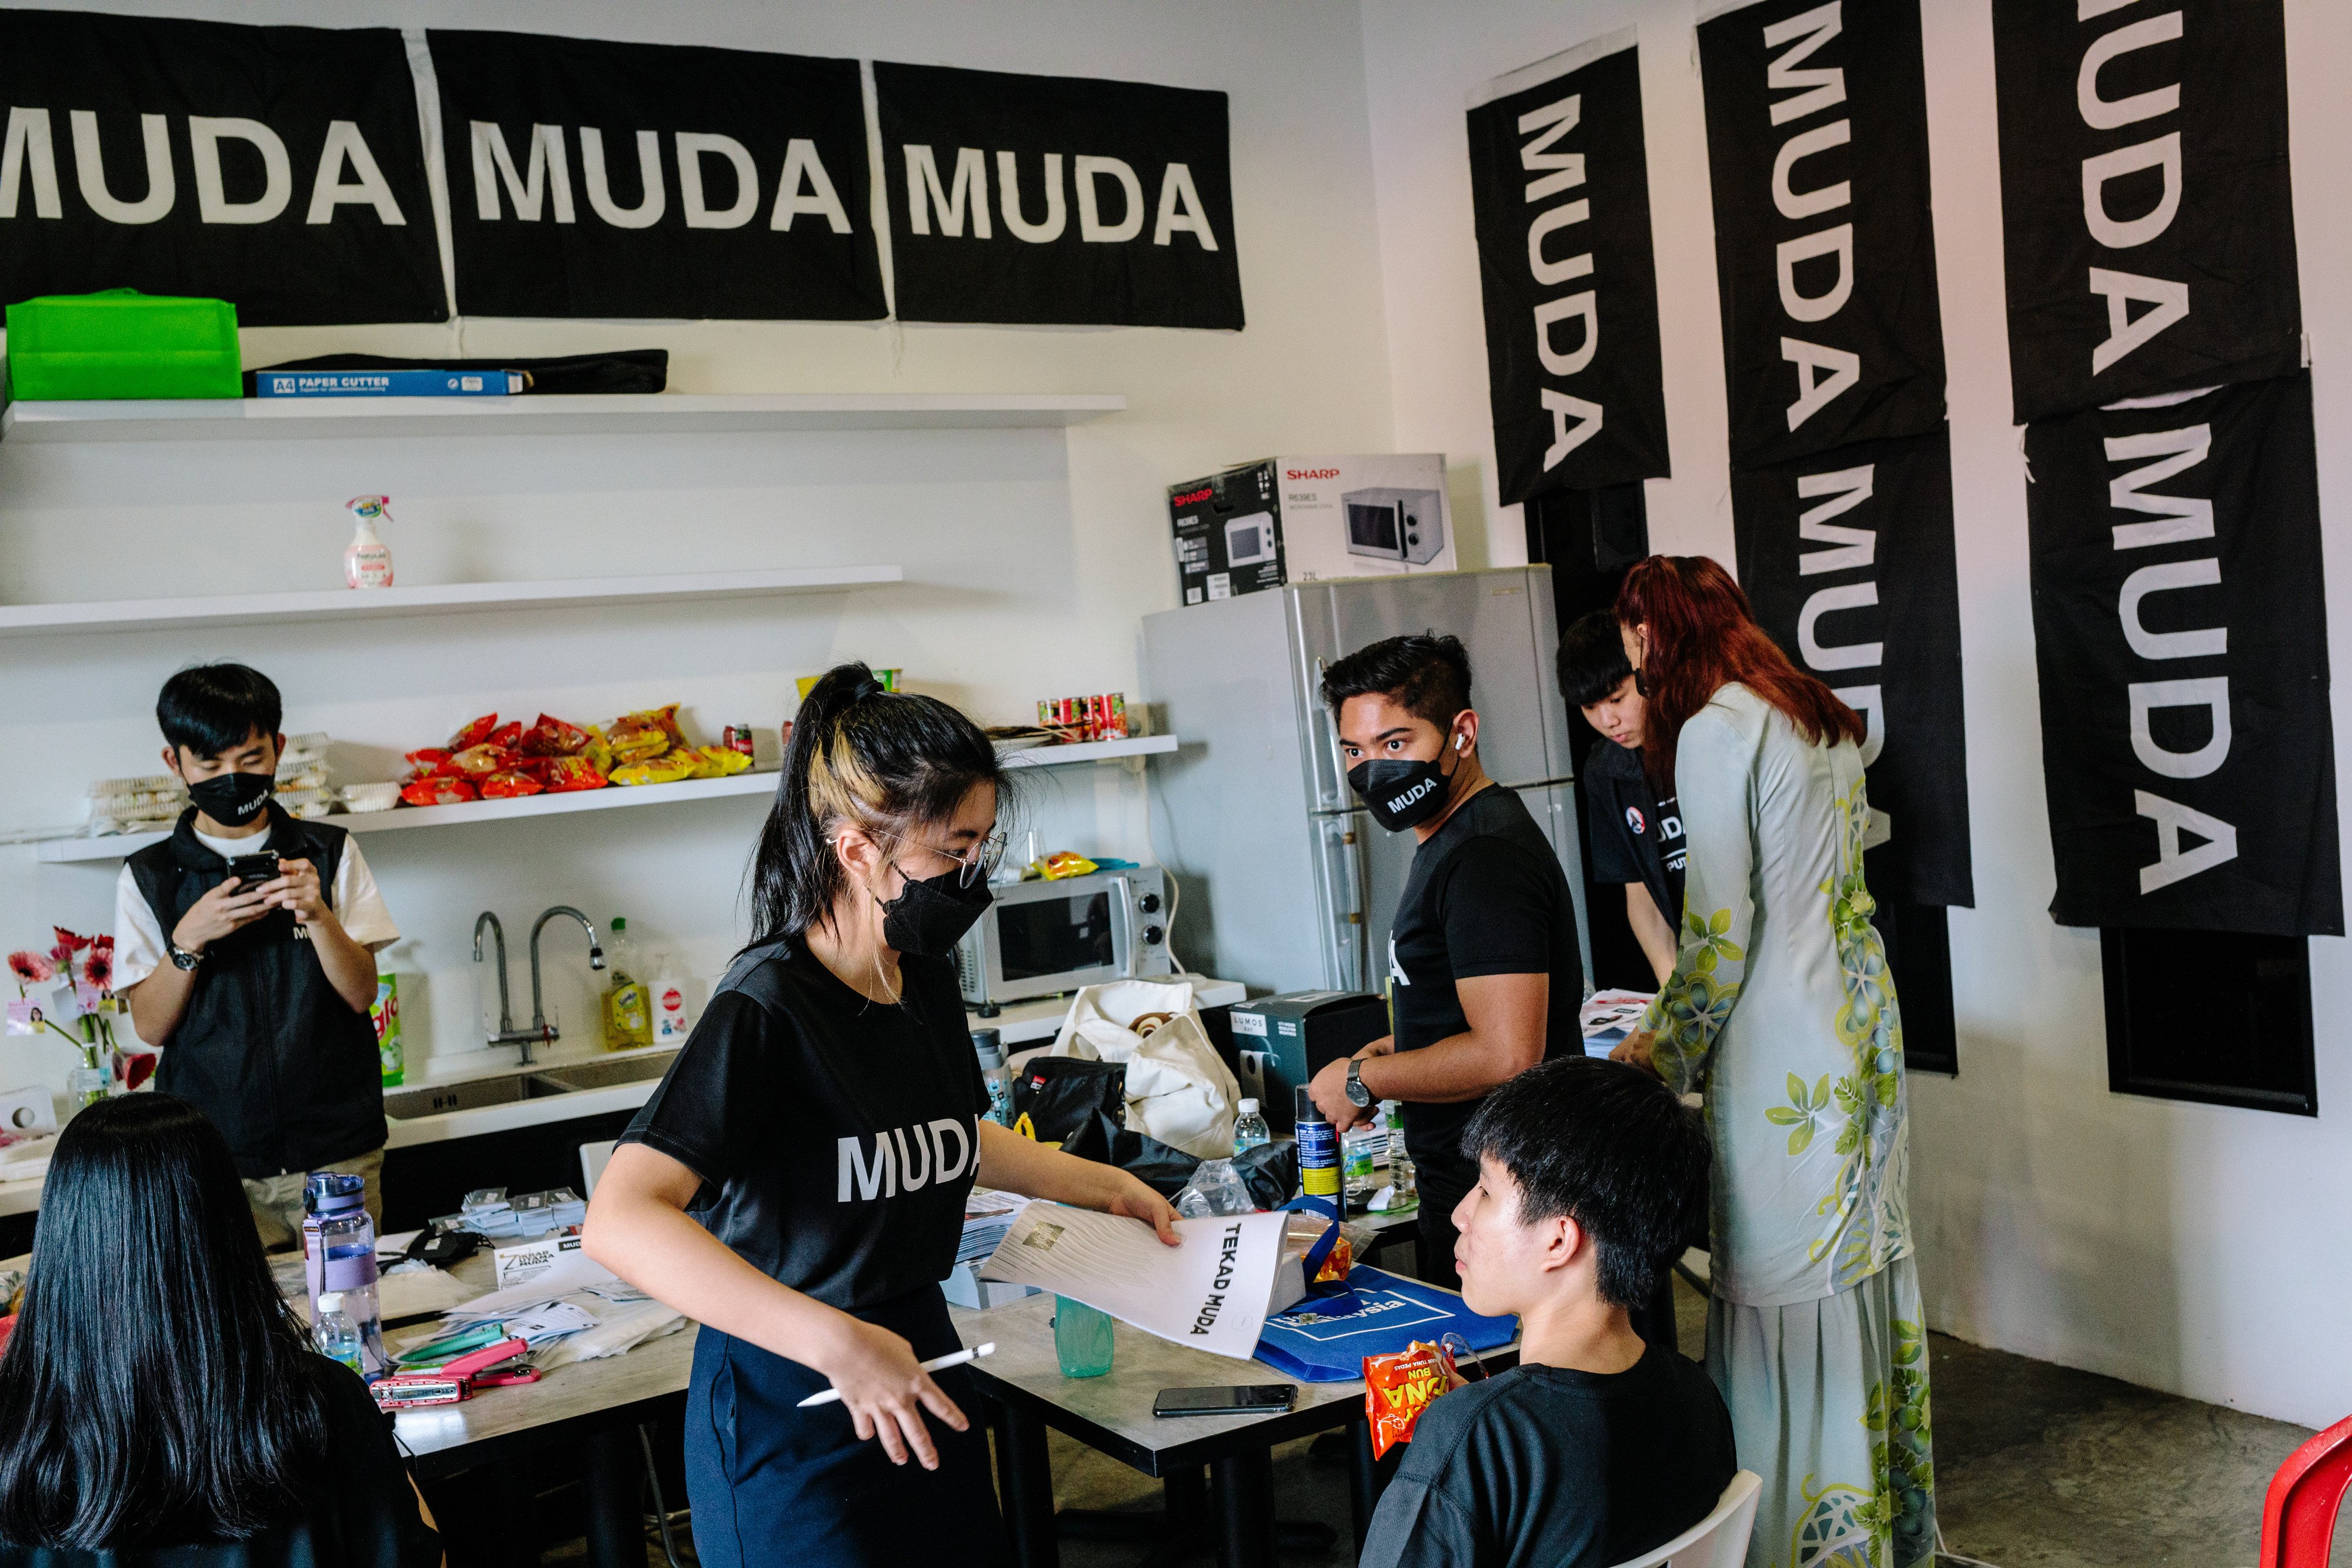 Muda, which was meant to reach young voters and steer Malaysian politics away from the ageing stalwarts lost all 19 seats it contested in last week’s state elections. Photo: Bloomberg